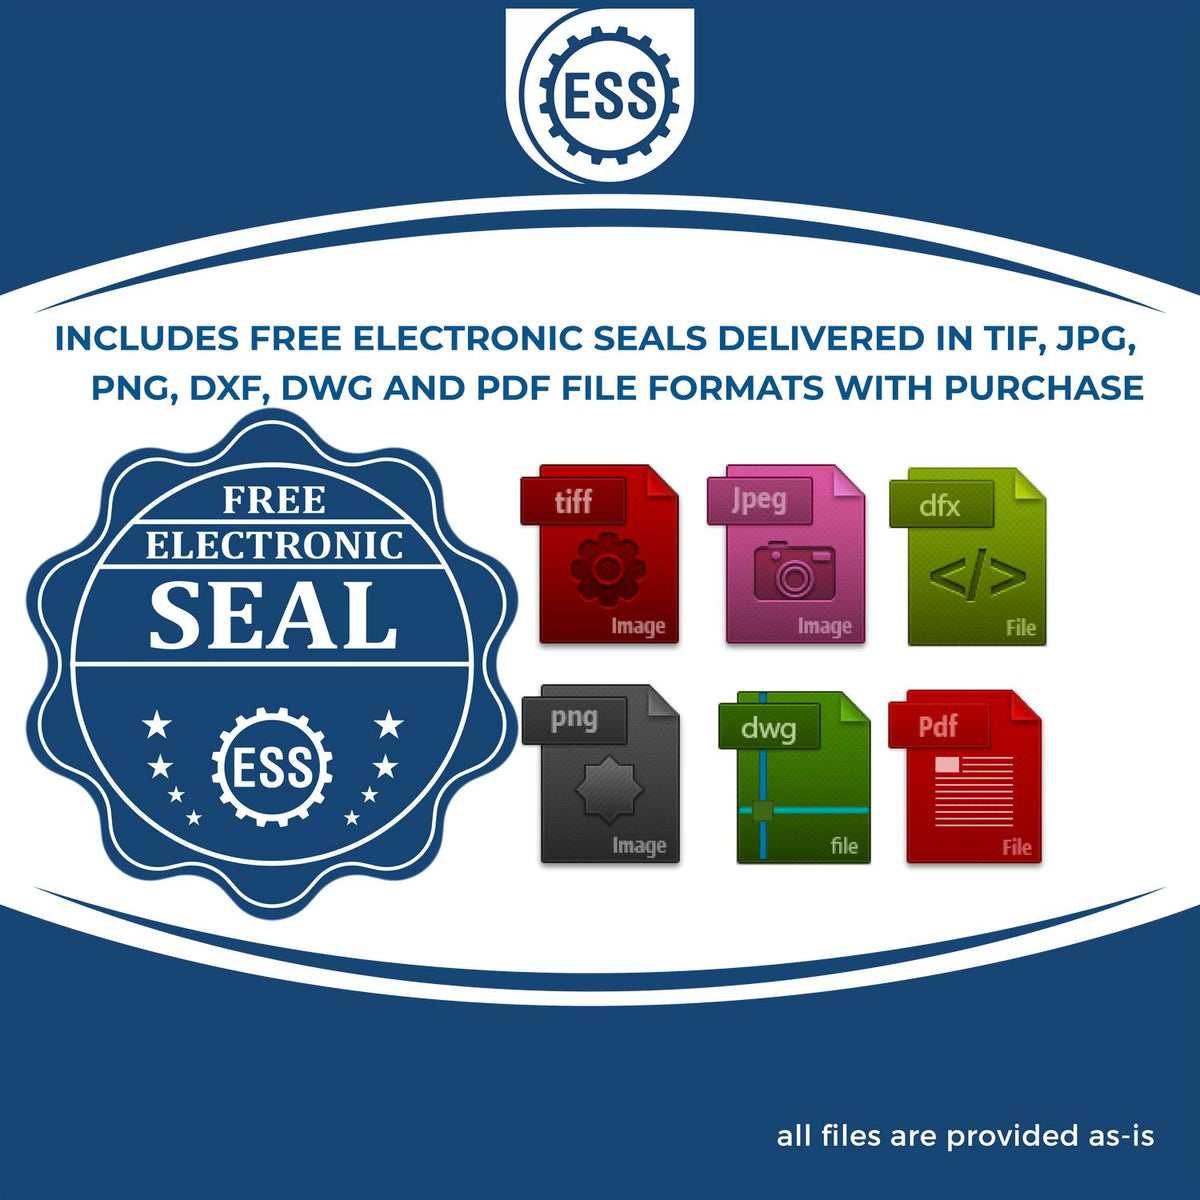 An infographic for the free electronic seal for the PSI New Jersey Notary Stamp illustrating the different file type icons such as DXF, DWG, TIF, JPG and PNG.